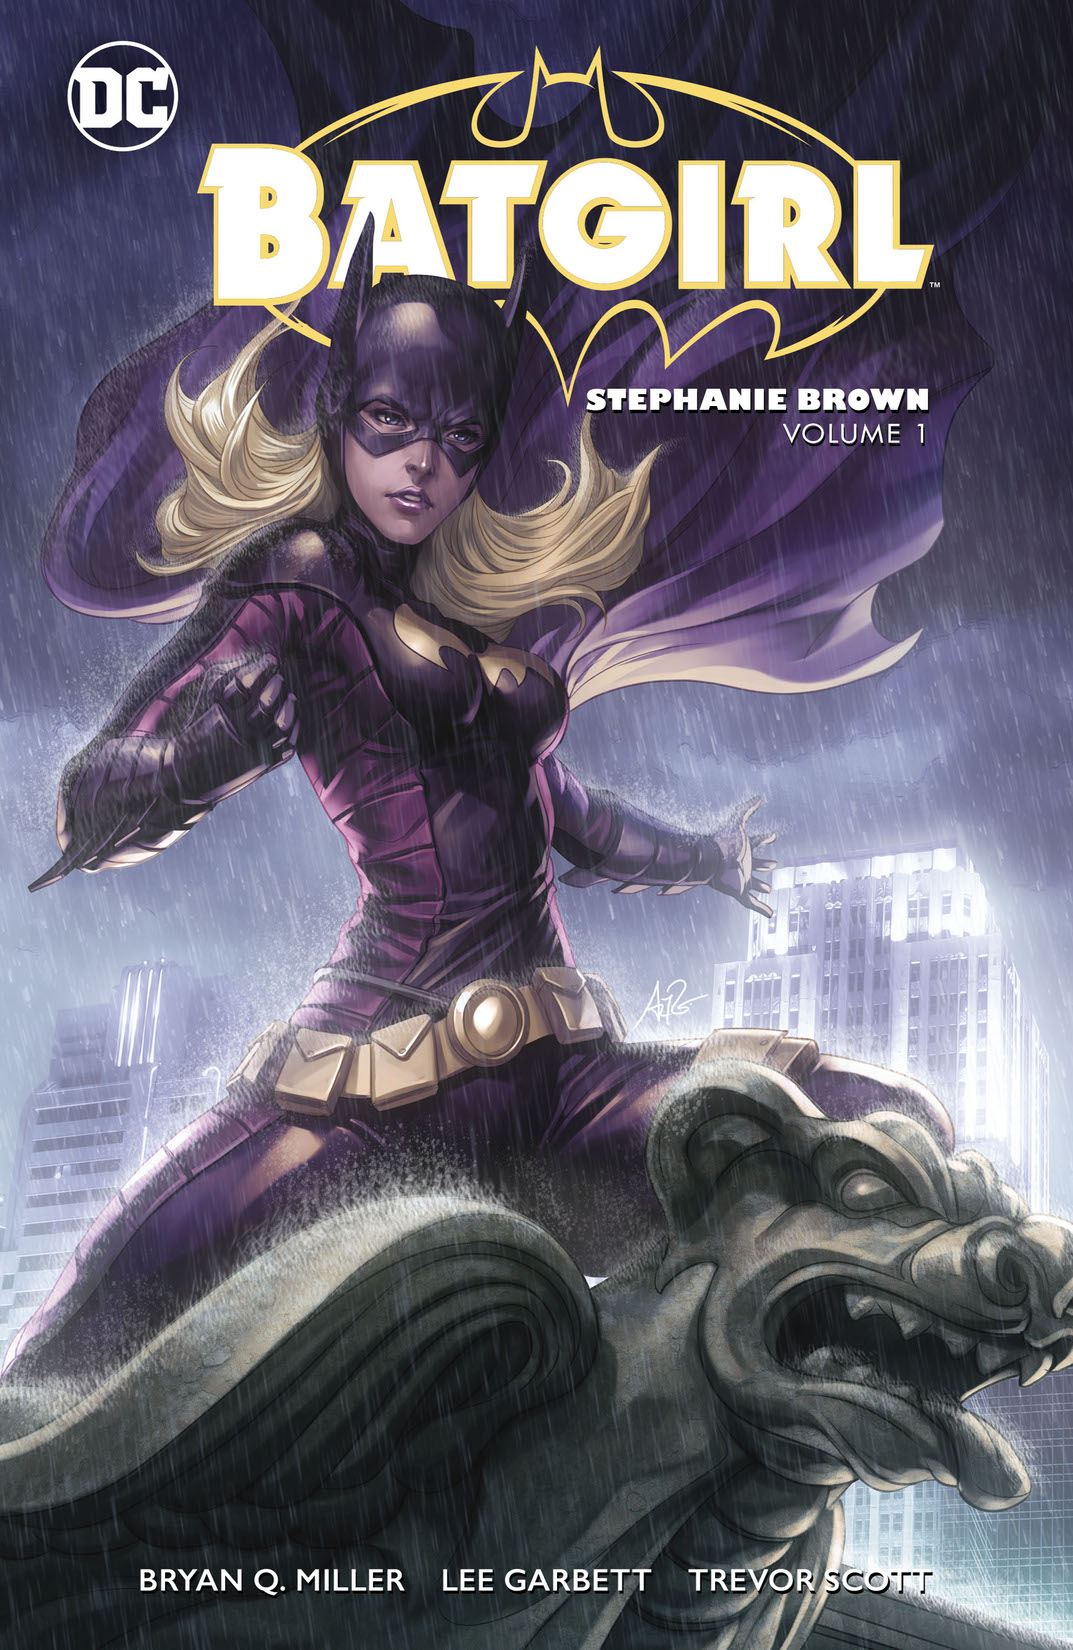 Batgirl: Stephanie Brown Vol. 1 preview images